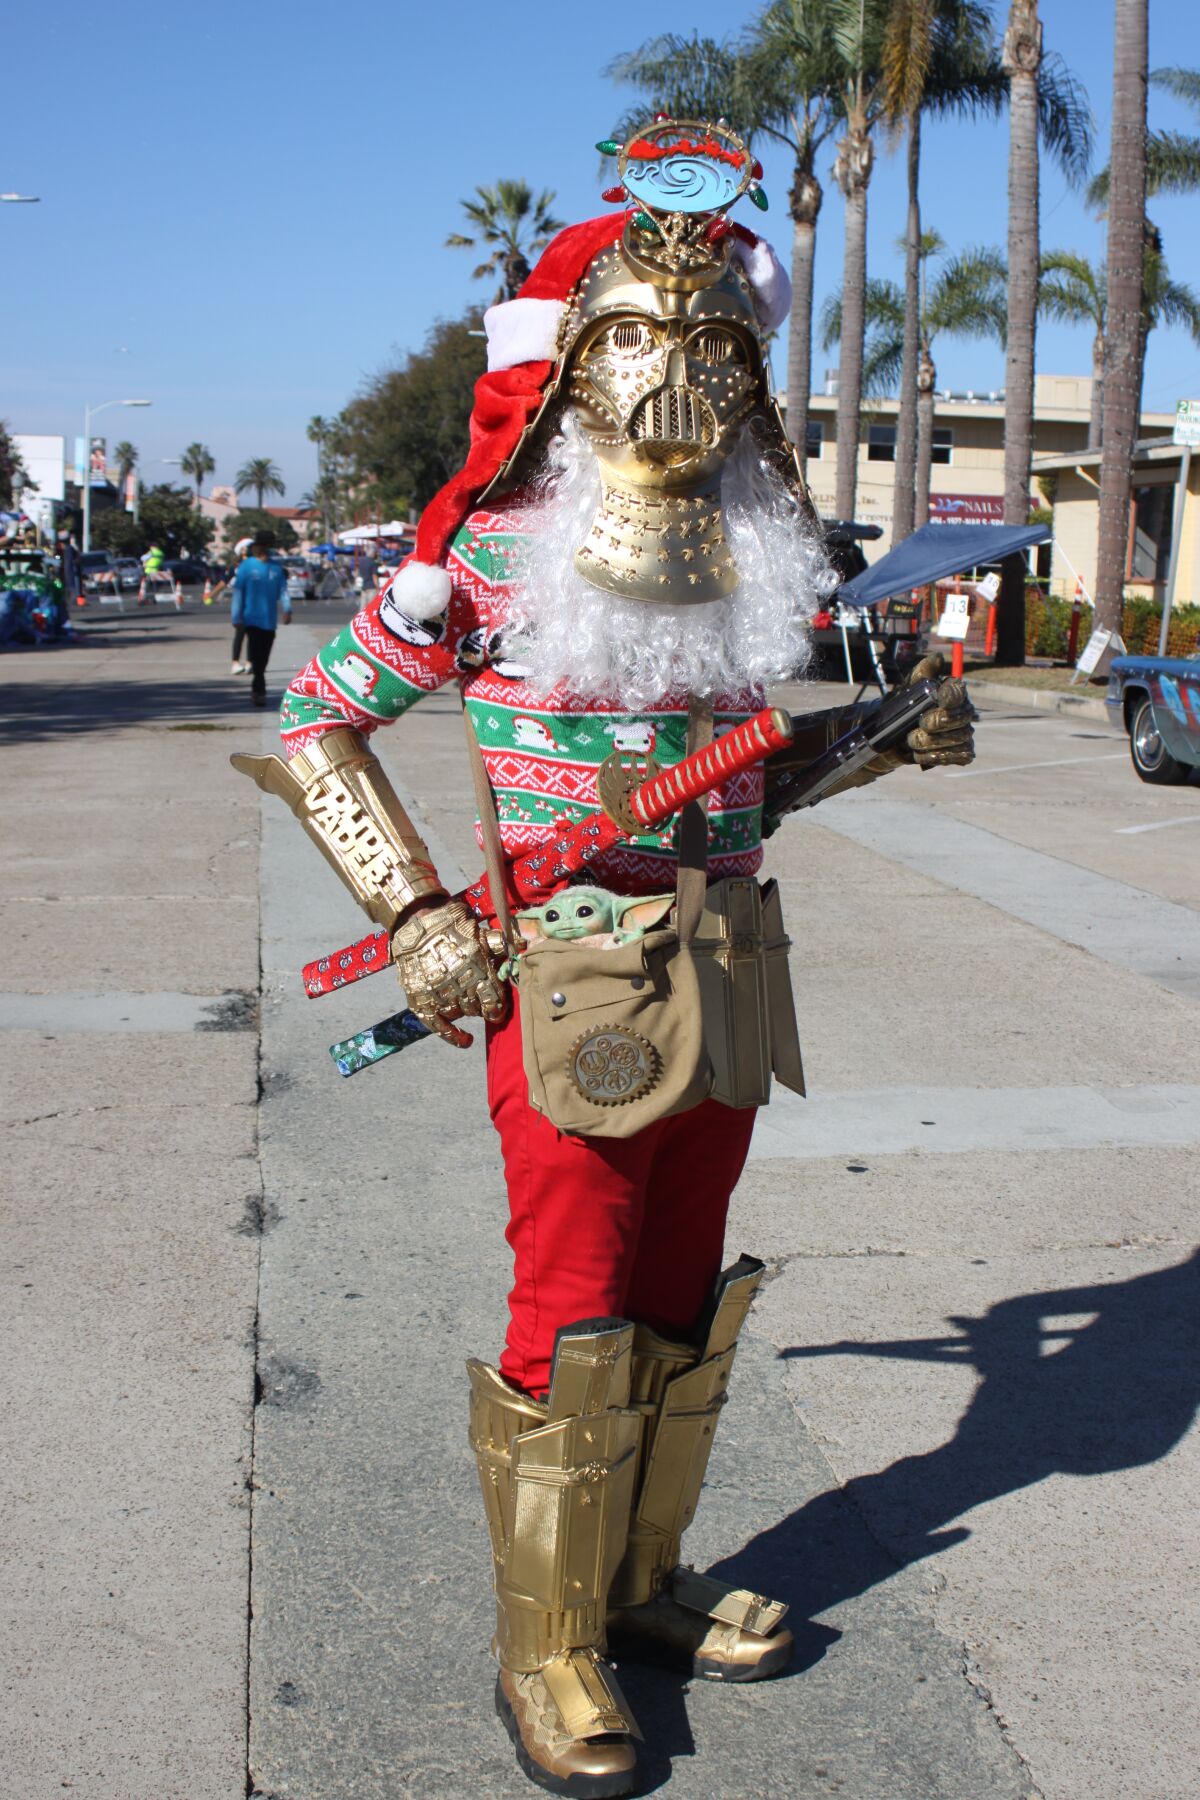 Christopher Canole, as "Dude Vader," greets La Jolla Christmas Parade visitors in 2020.